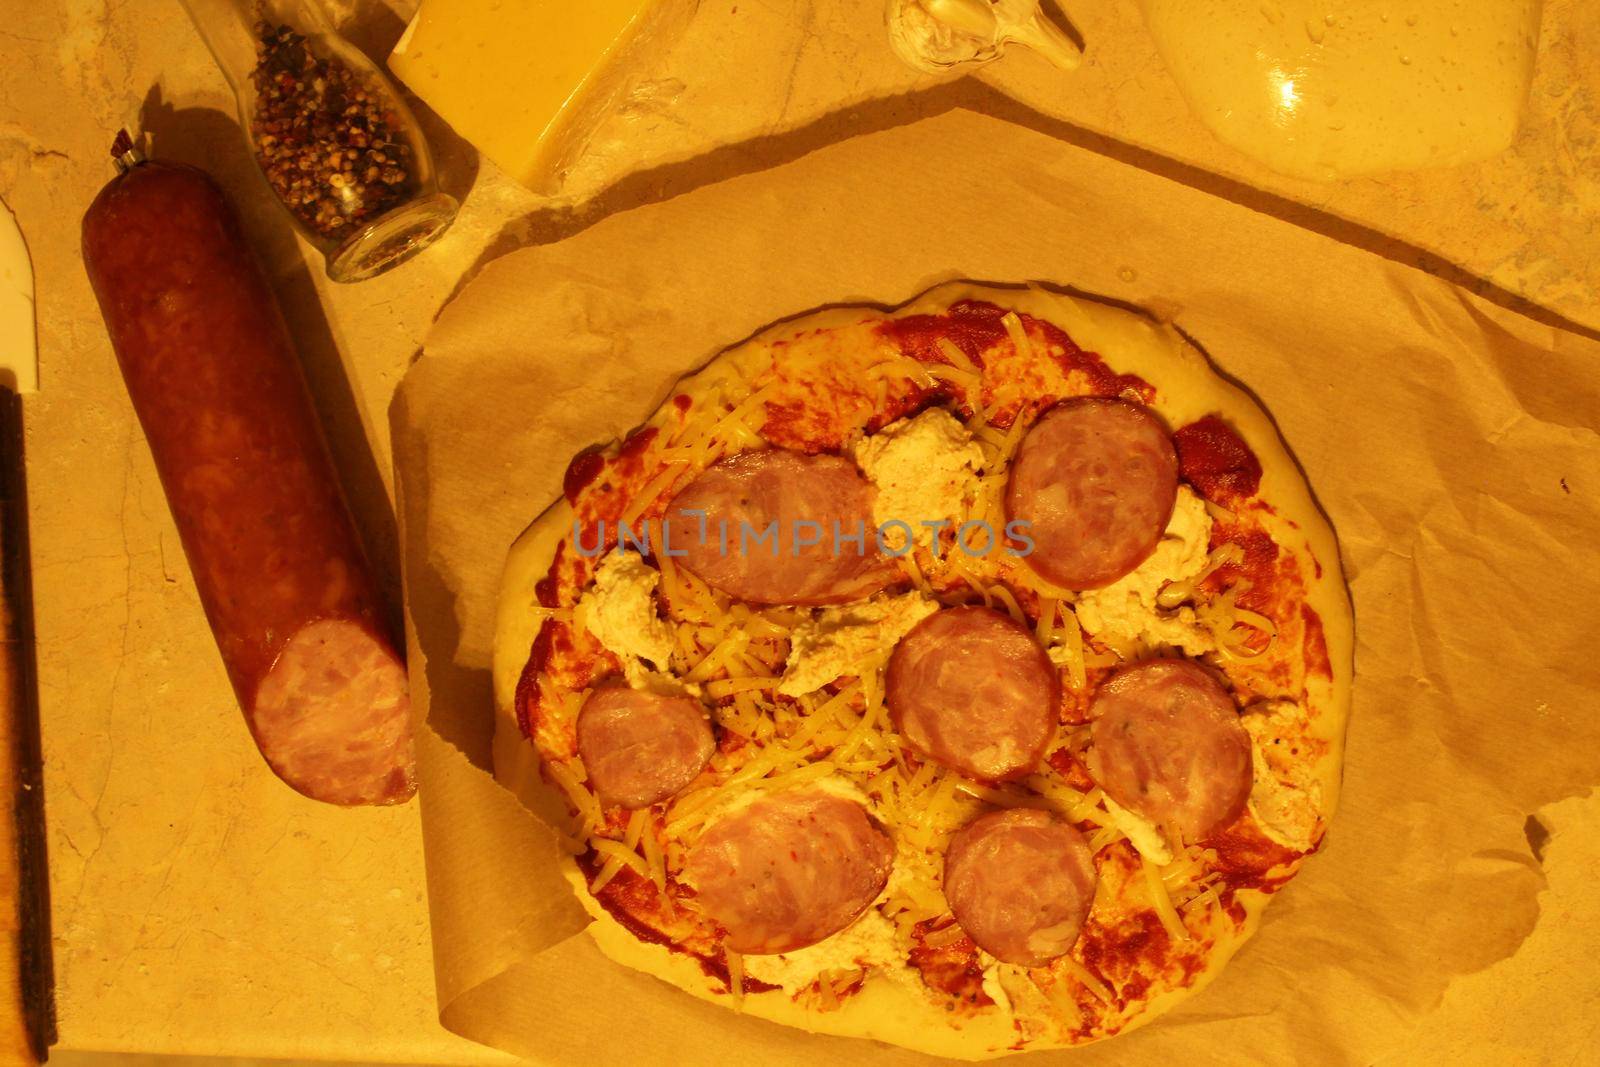 pizza with ham sausage. Homemade pizza meals lie on parchment next to the sausage. Top view.